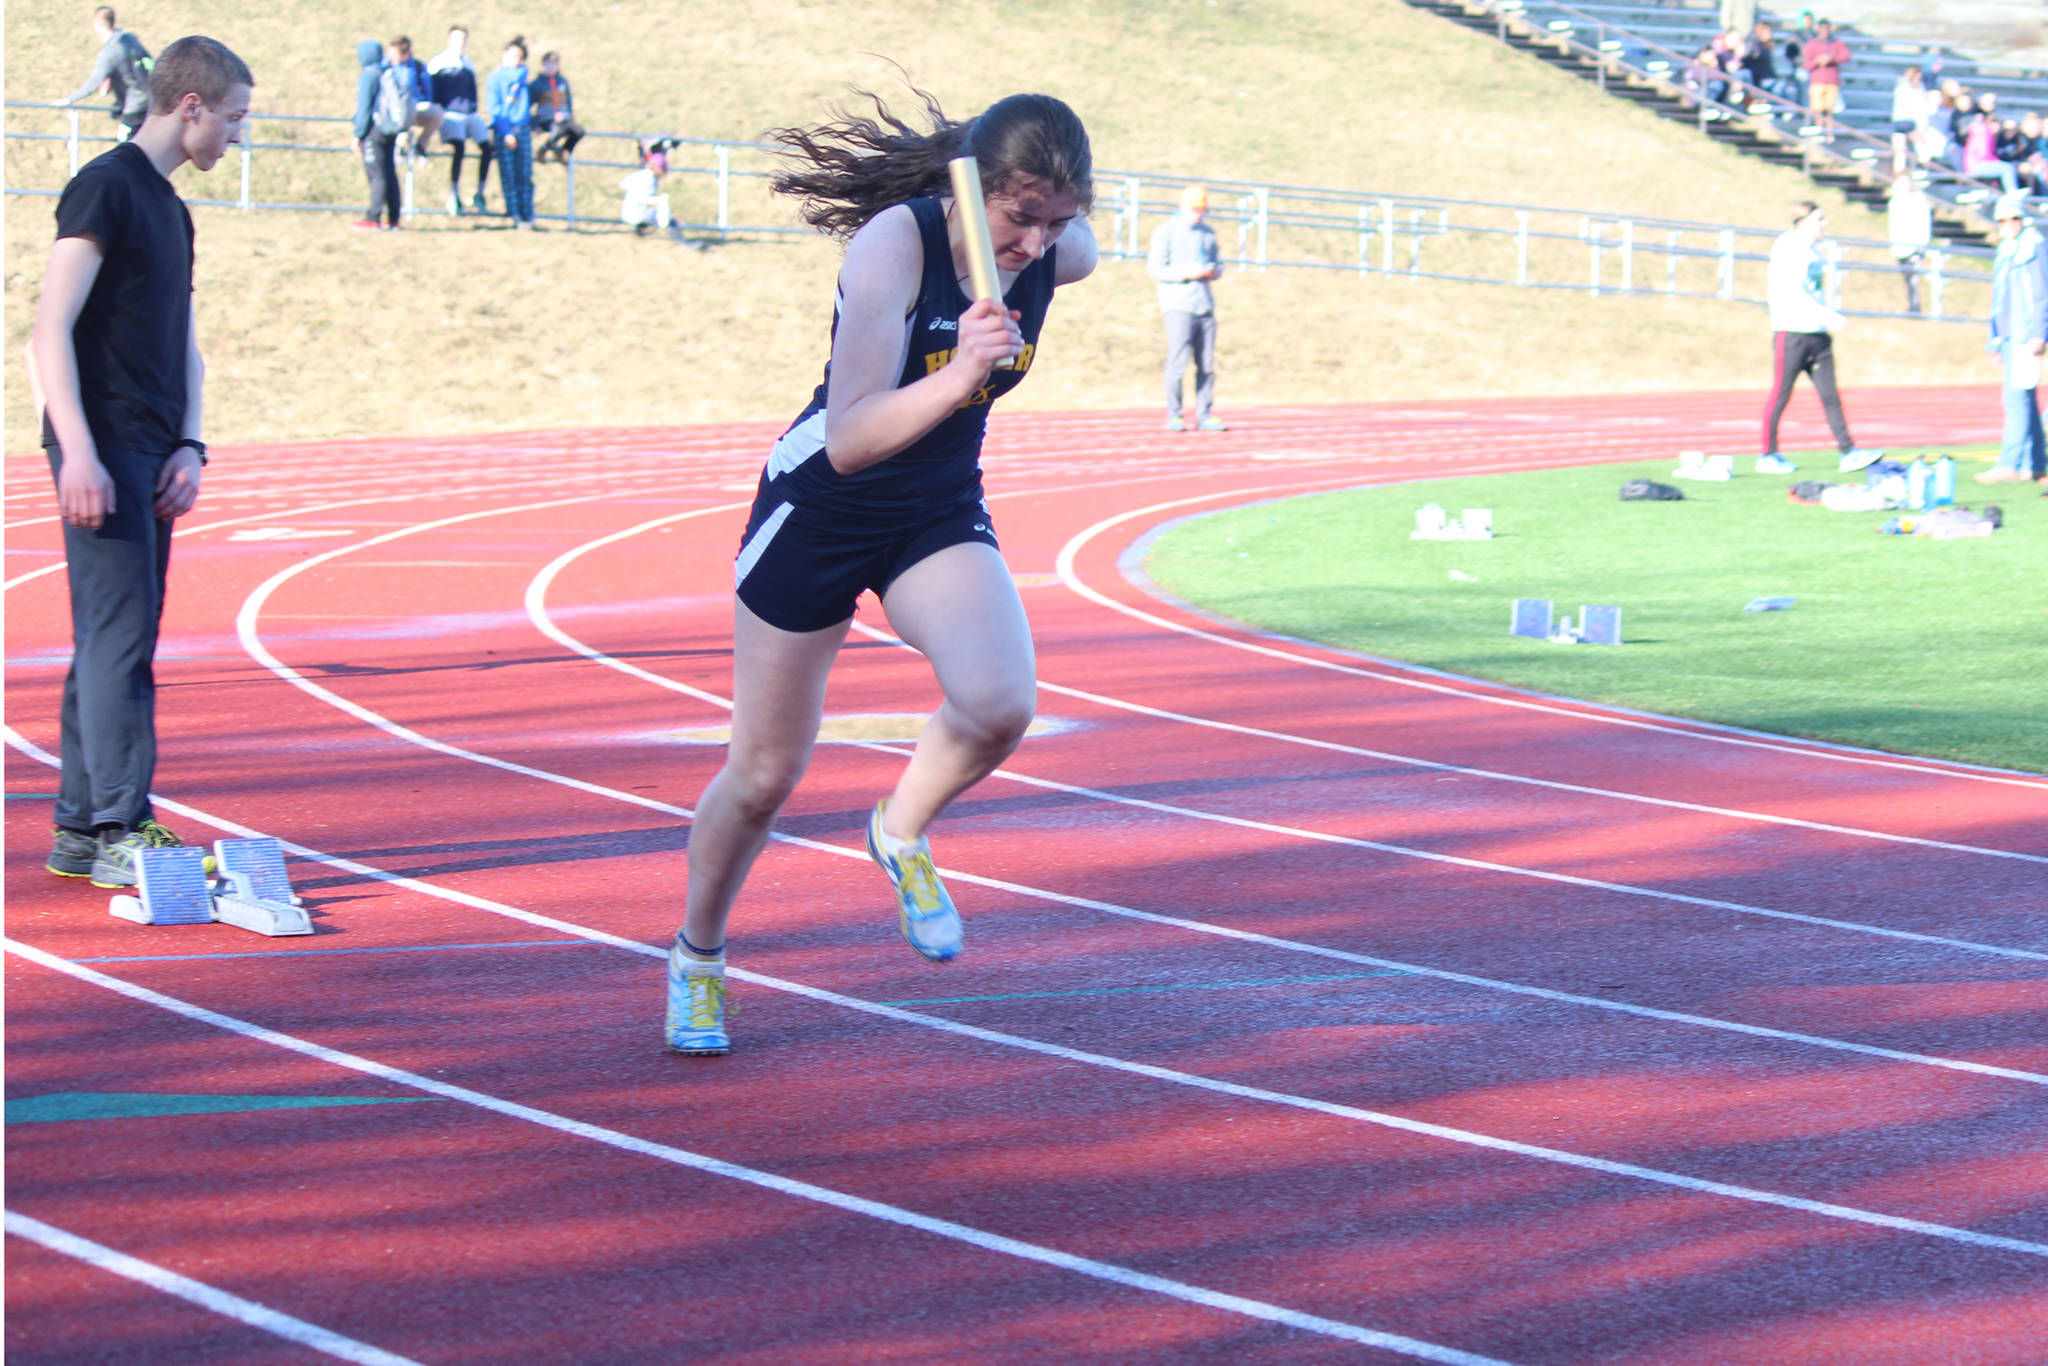 Homer’s Marina Carroll takes off from her blocks as the first leg of the girls’ 1,600-meter relay Friday, April 13, 2018 at Homer High School in Homer, Alaska. The Homer High track and field team faced off against Soldotna High School in a dual meet. (Photo by Megan Pacer/Homer News)